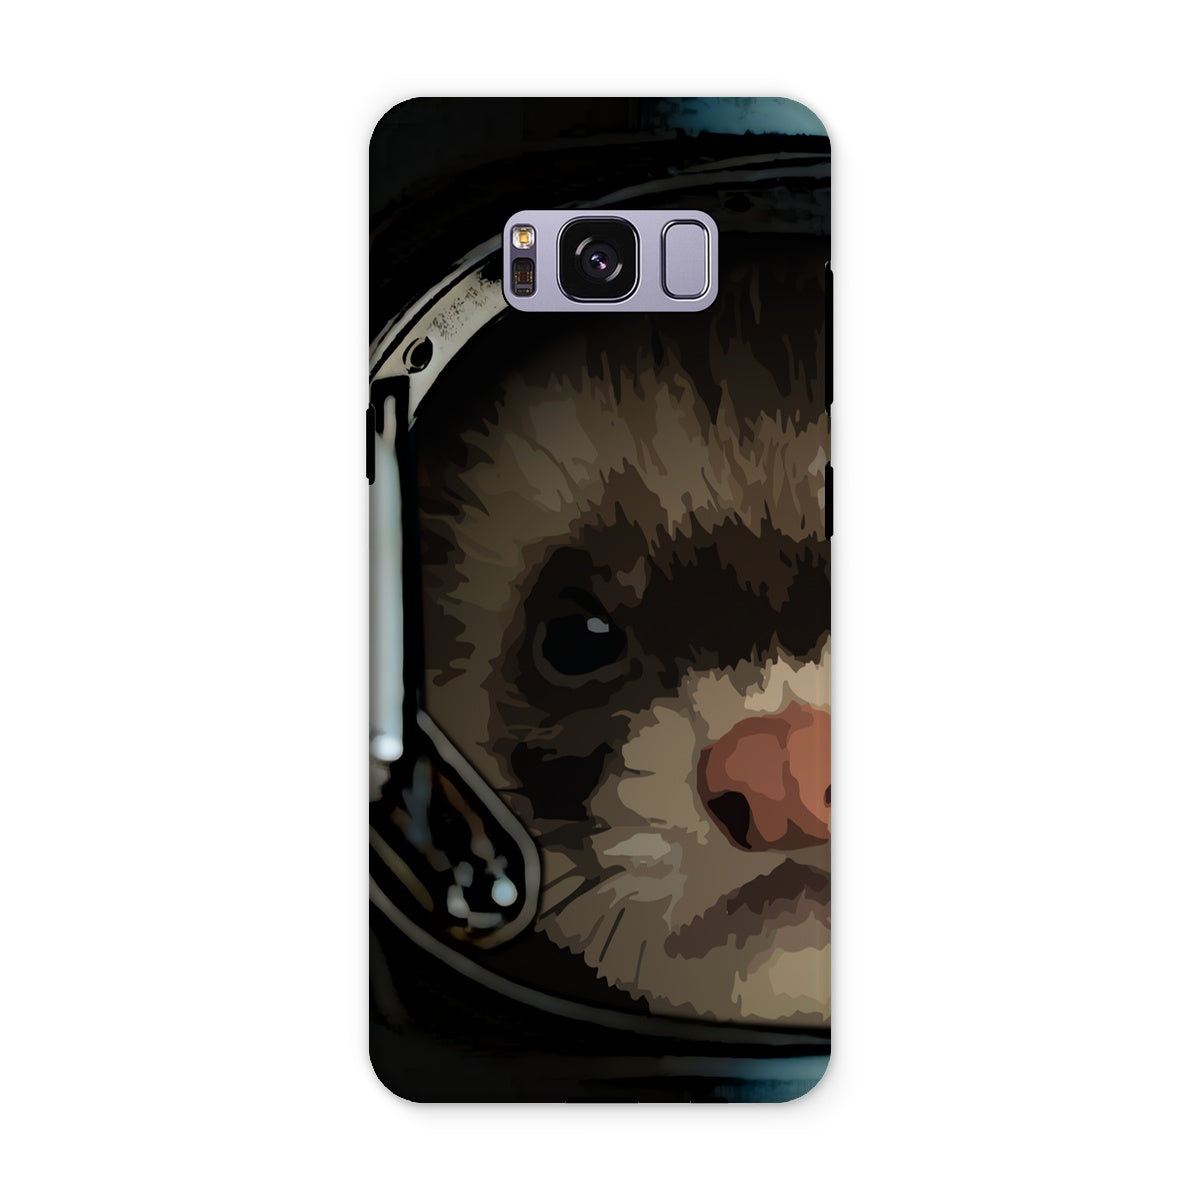 For All Ferretkind Tough Phone Case